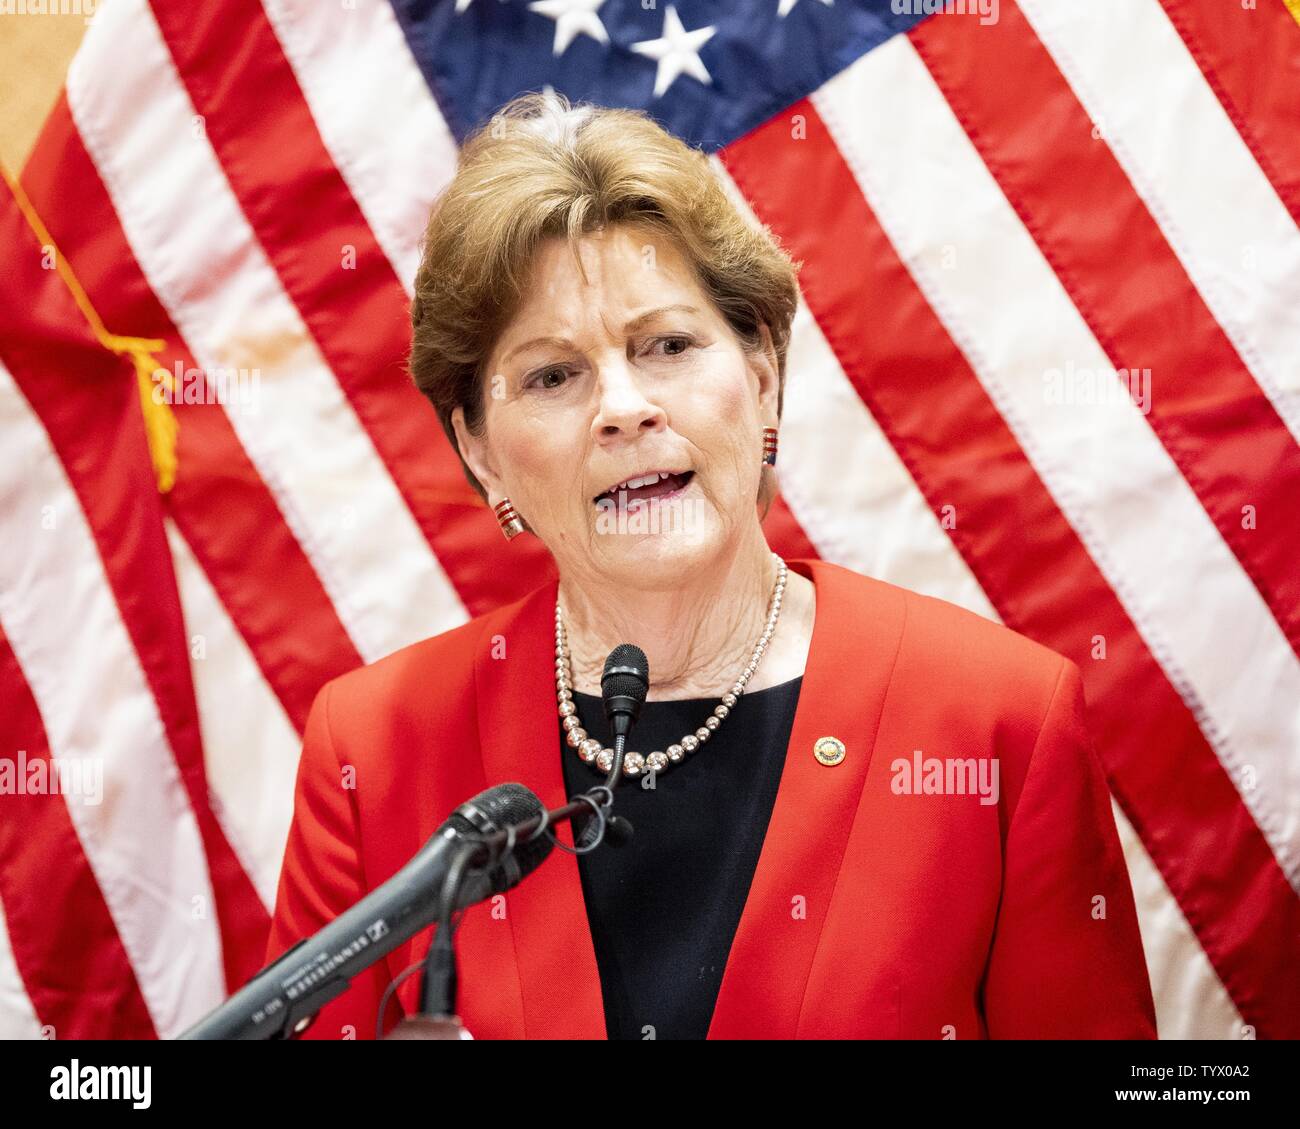 Washington, D.C, USA. 26th June, 2019. U.S. Senator JEANNE SHAHEEN (D-NH) speaking at a press conference at the U.S. Capitol to highlight seniors facing higher prescription drug prices if the Affordable Care Act (ACA) is overturned, in Washington, DC on June 26, 2019. Credit: Michael Brochstein/ZUMA Wire/Alamy Live News Stock Photo